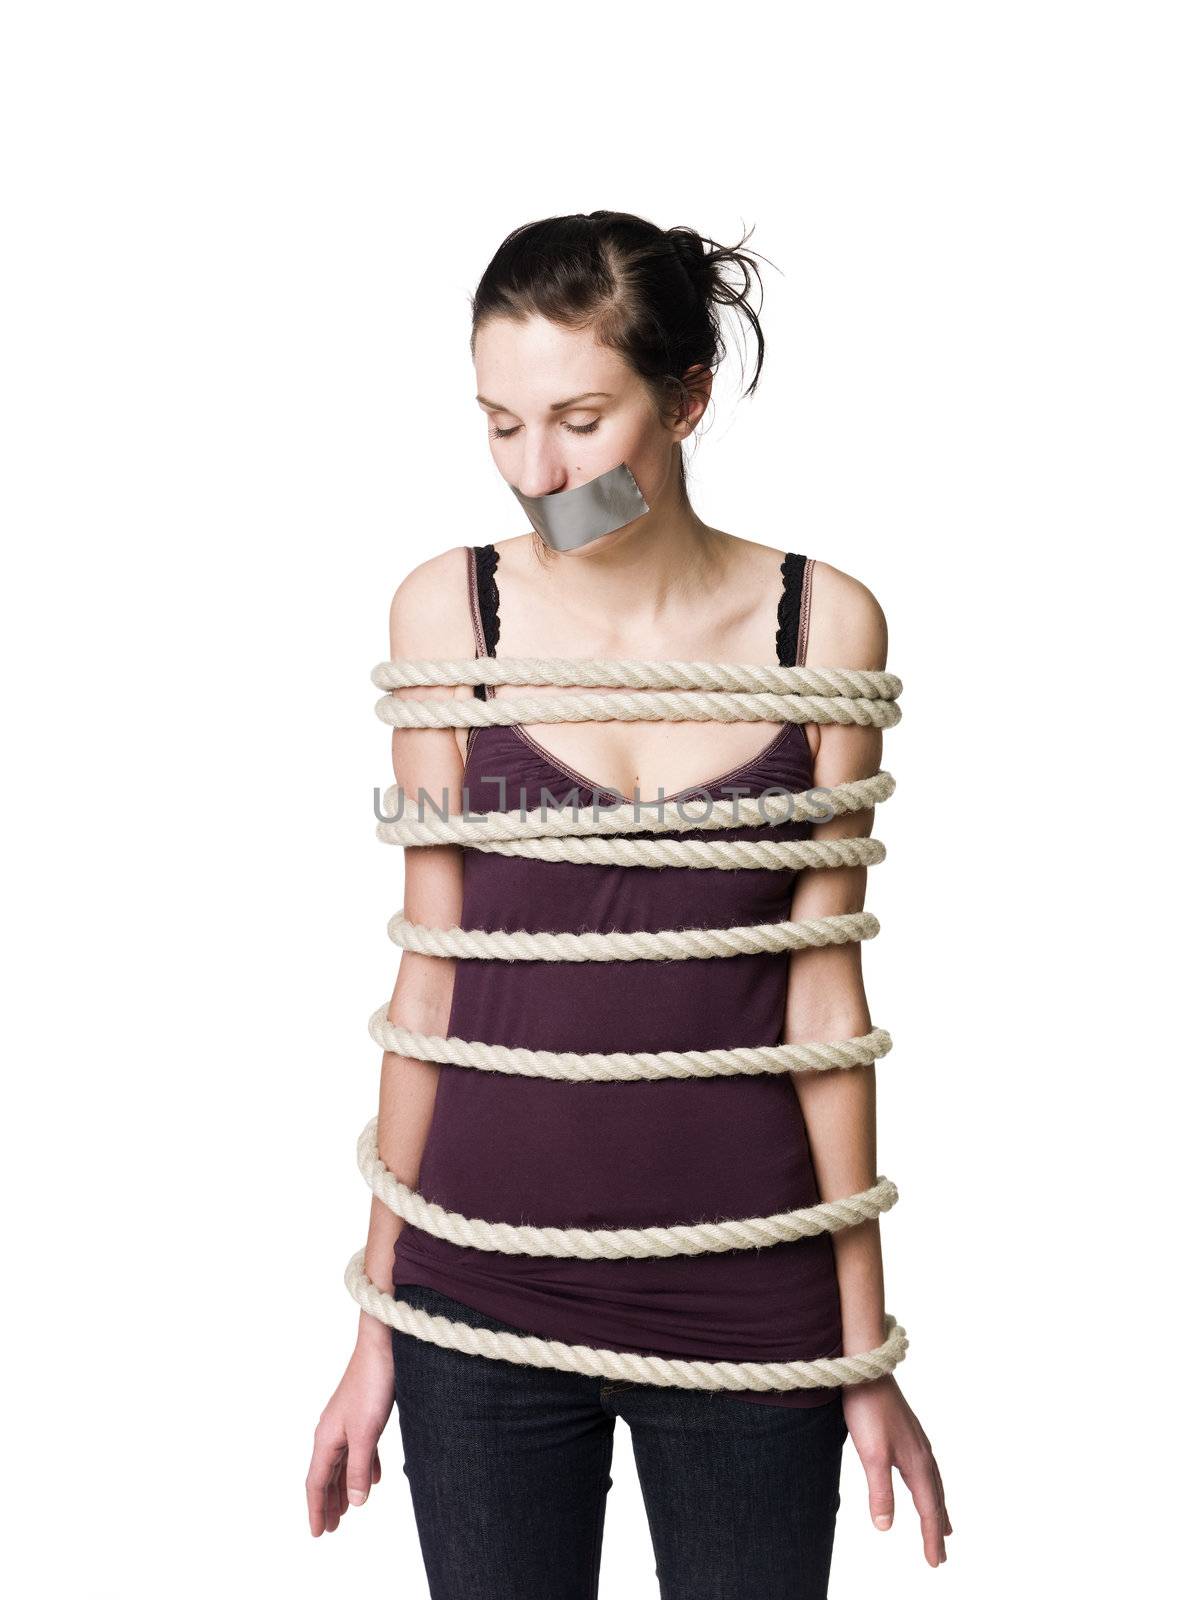 Tied up woman with tape over her mouth